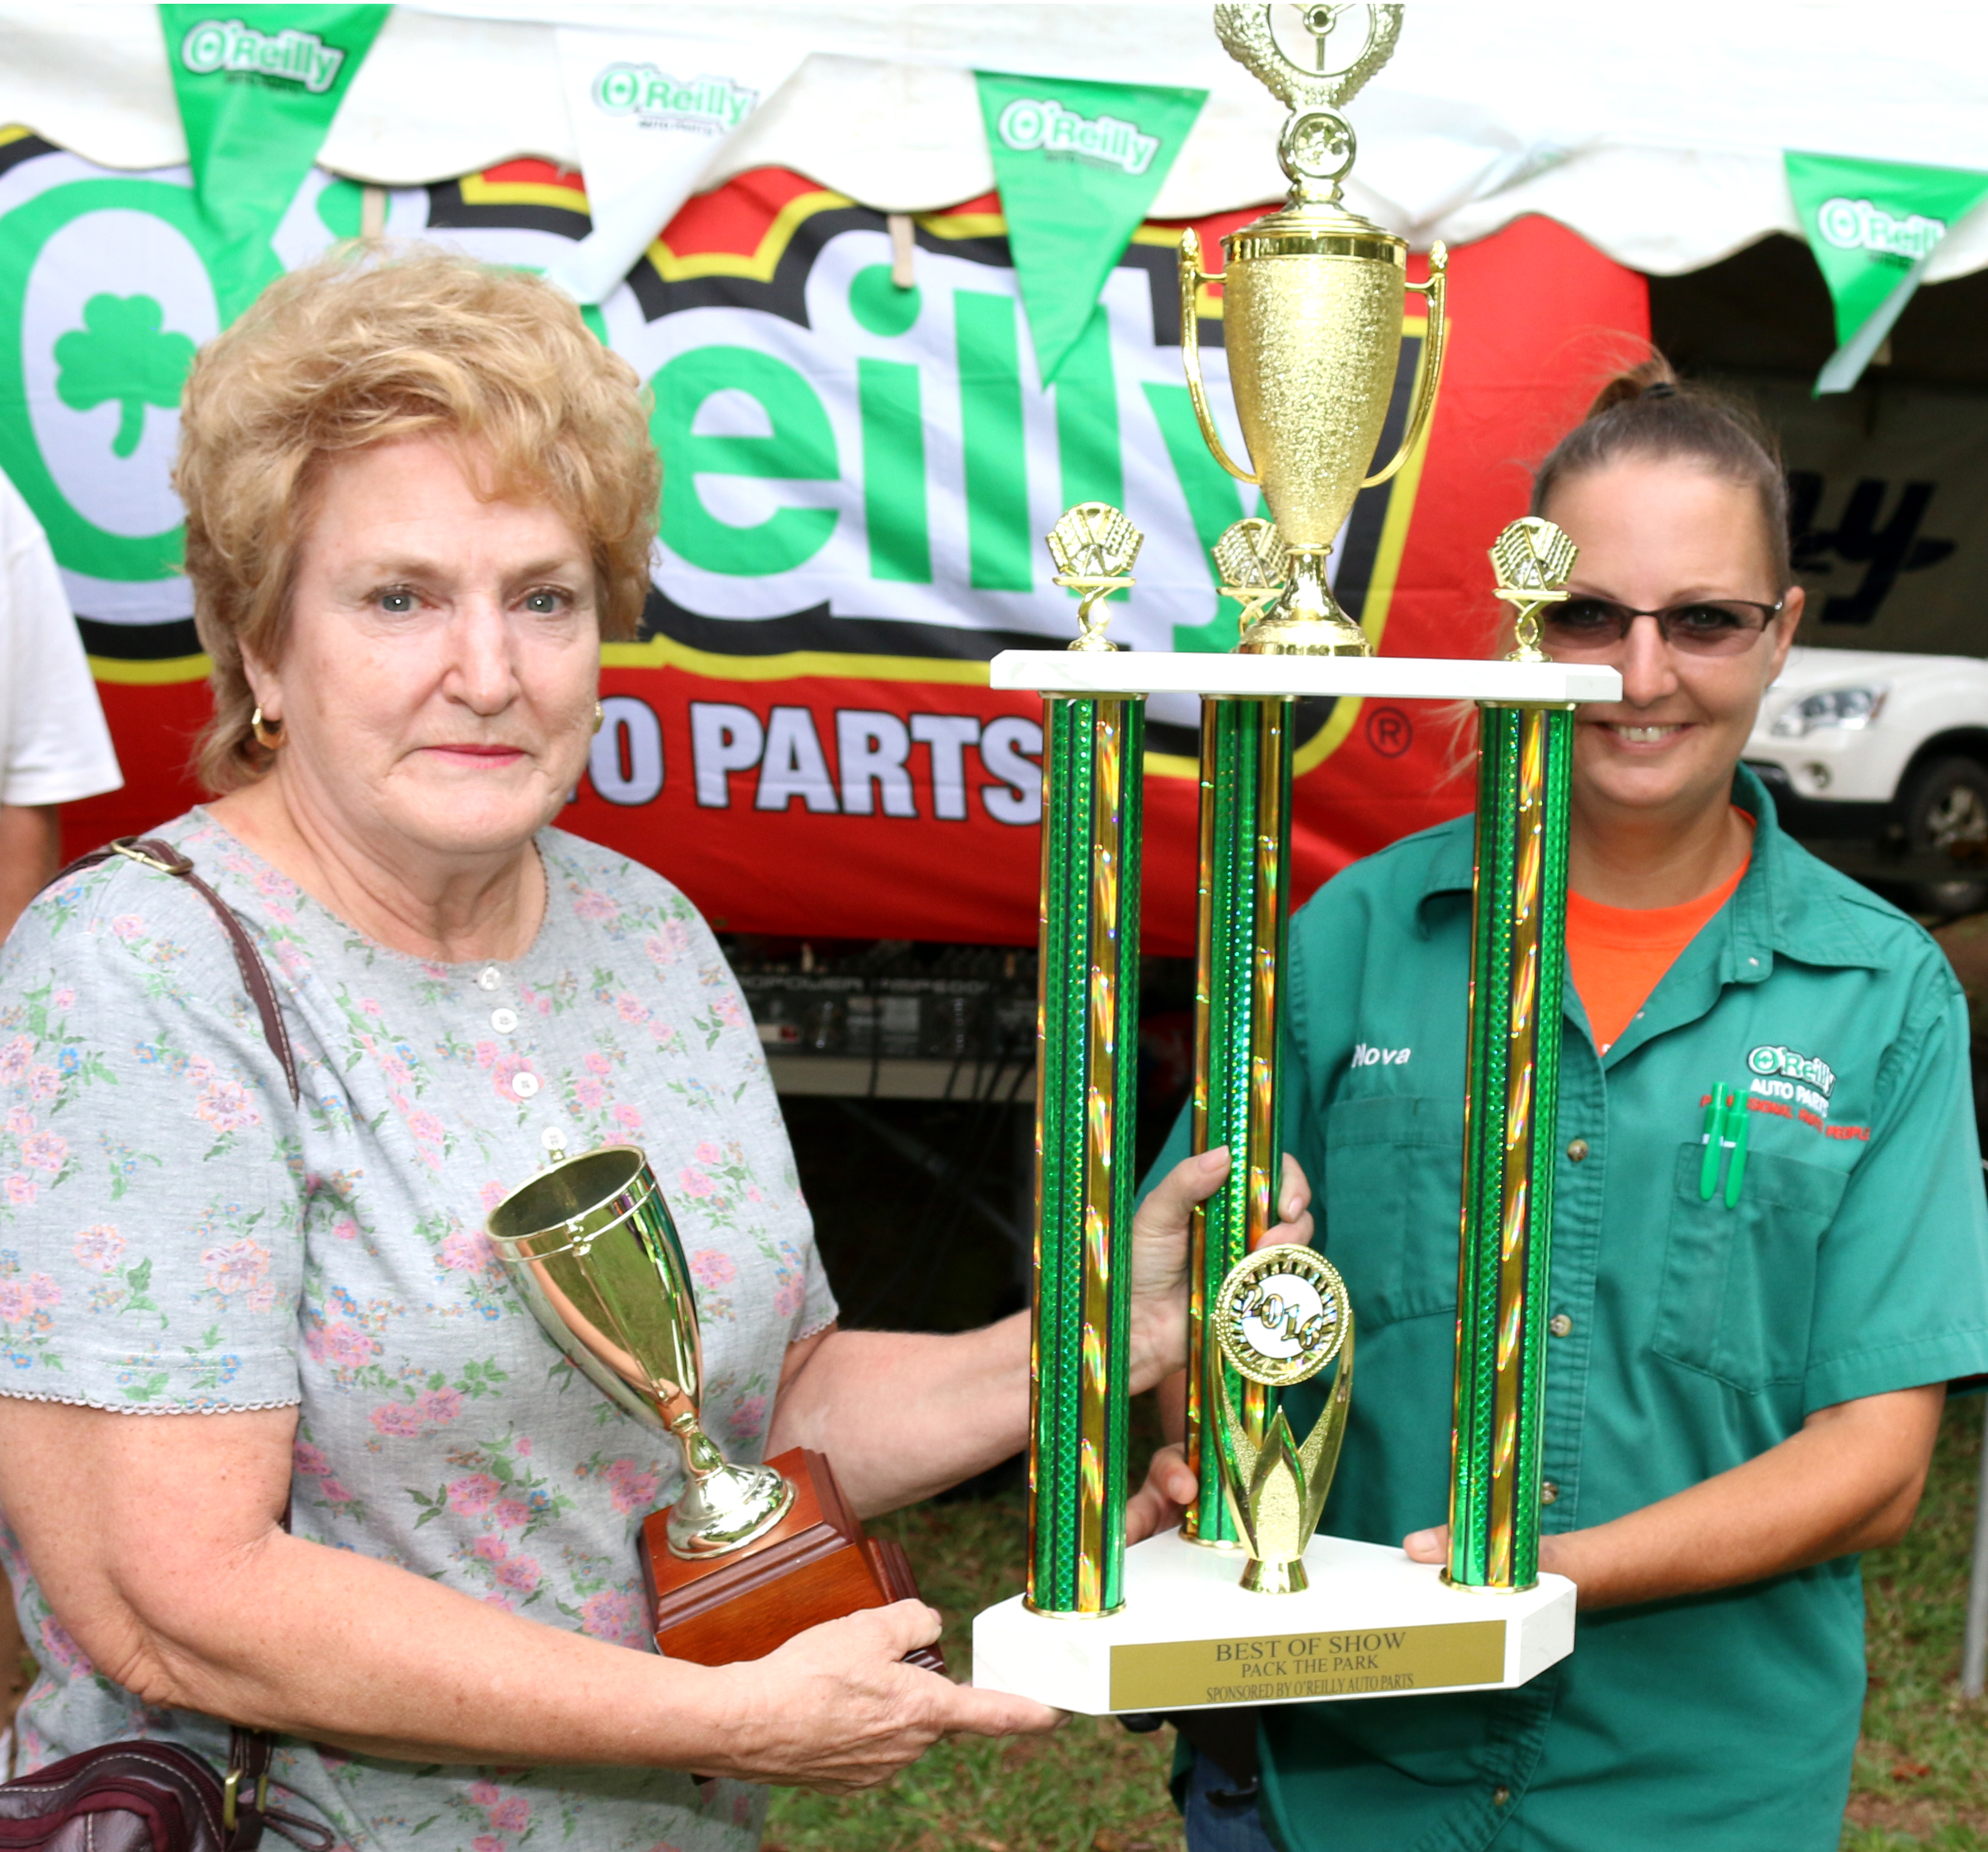 Joyce Banes of Nashville own Best of Show - Truck at the Pack the Park Car Show. She showed a 1954 Chevy Pickup. Exhibitors came from three states to show off their gleaming vehicles. The trophy was presented by Nova Hill.